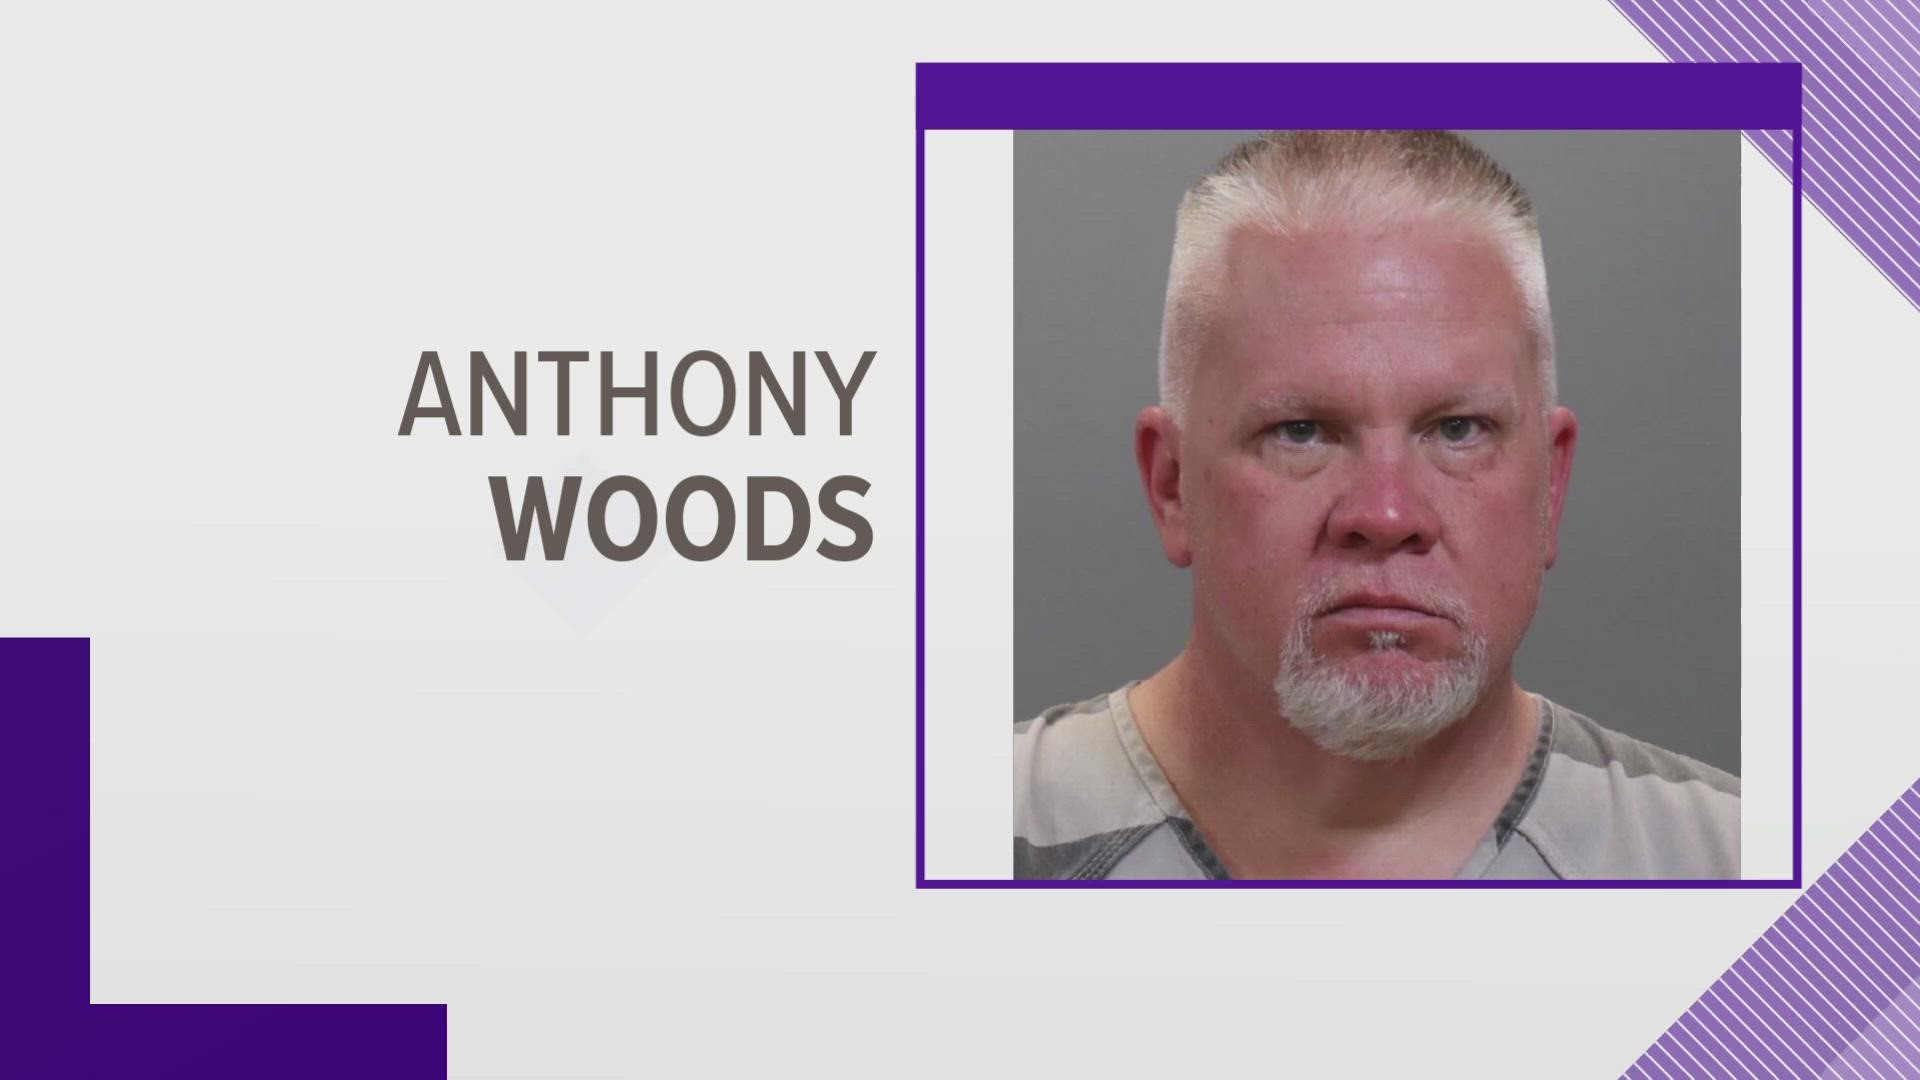 In 2021, a jury convicted 51-year-old Anthony Woods of multiple counts of sex crimes involving an underage girl. He faces the next 8 years on supervised probation.